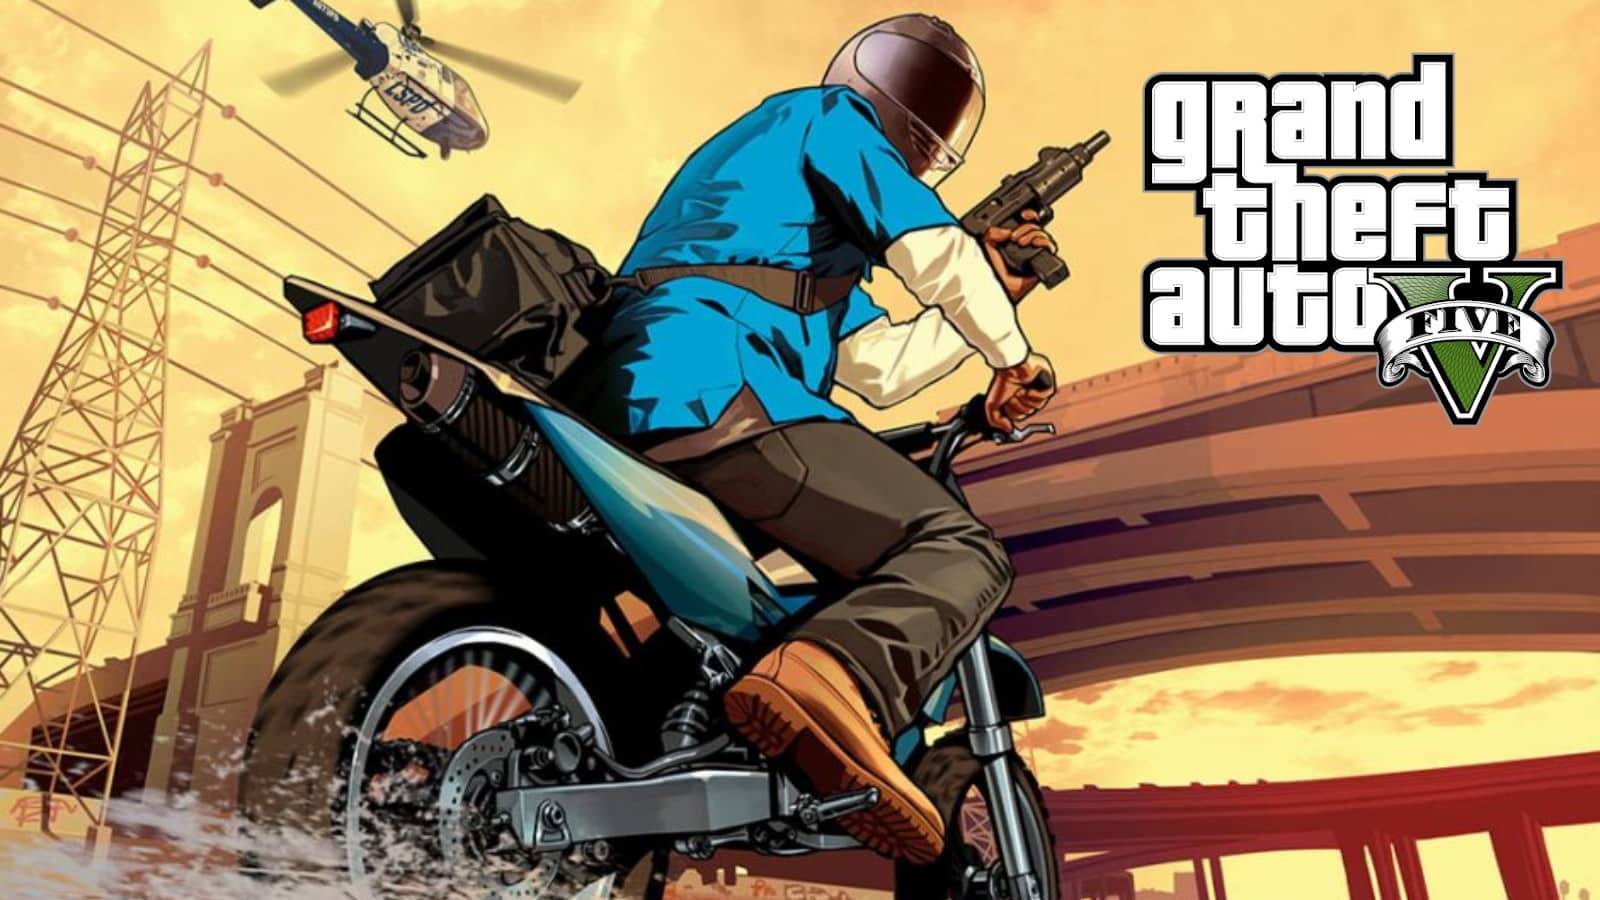 GTA V remastered on PS5 and xbox series